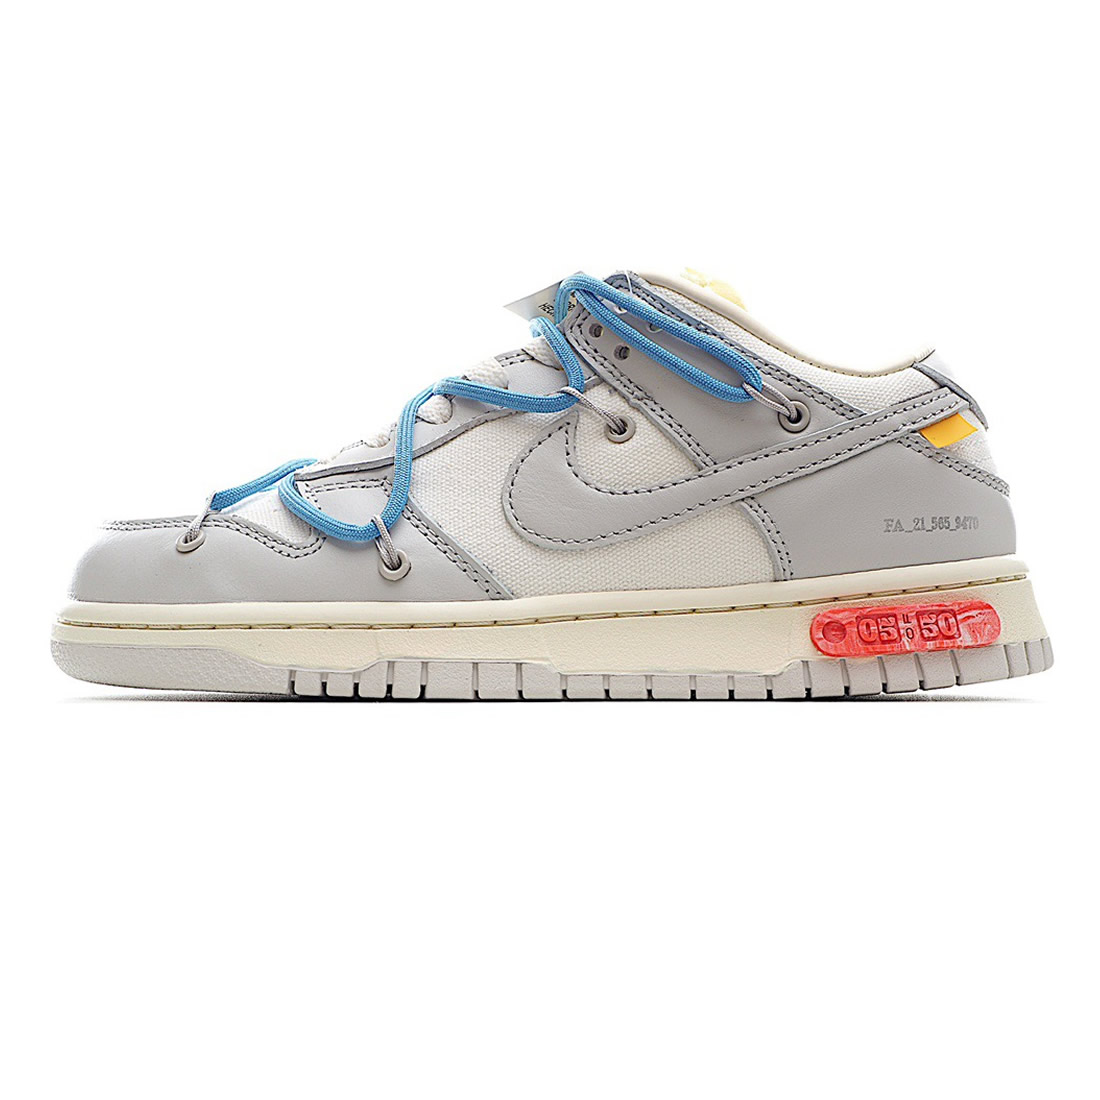 Off-White x Nike Dunk Low OW '05 of 50 